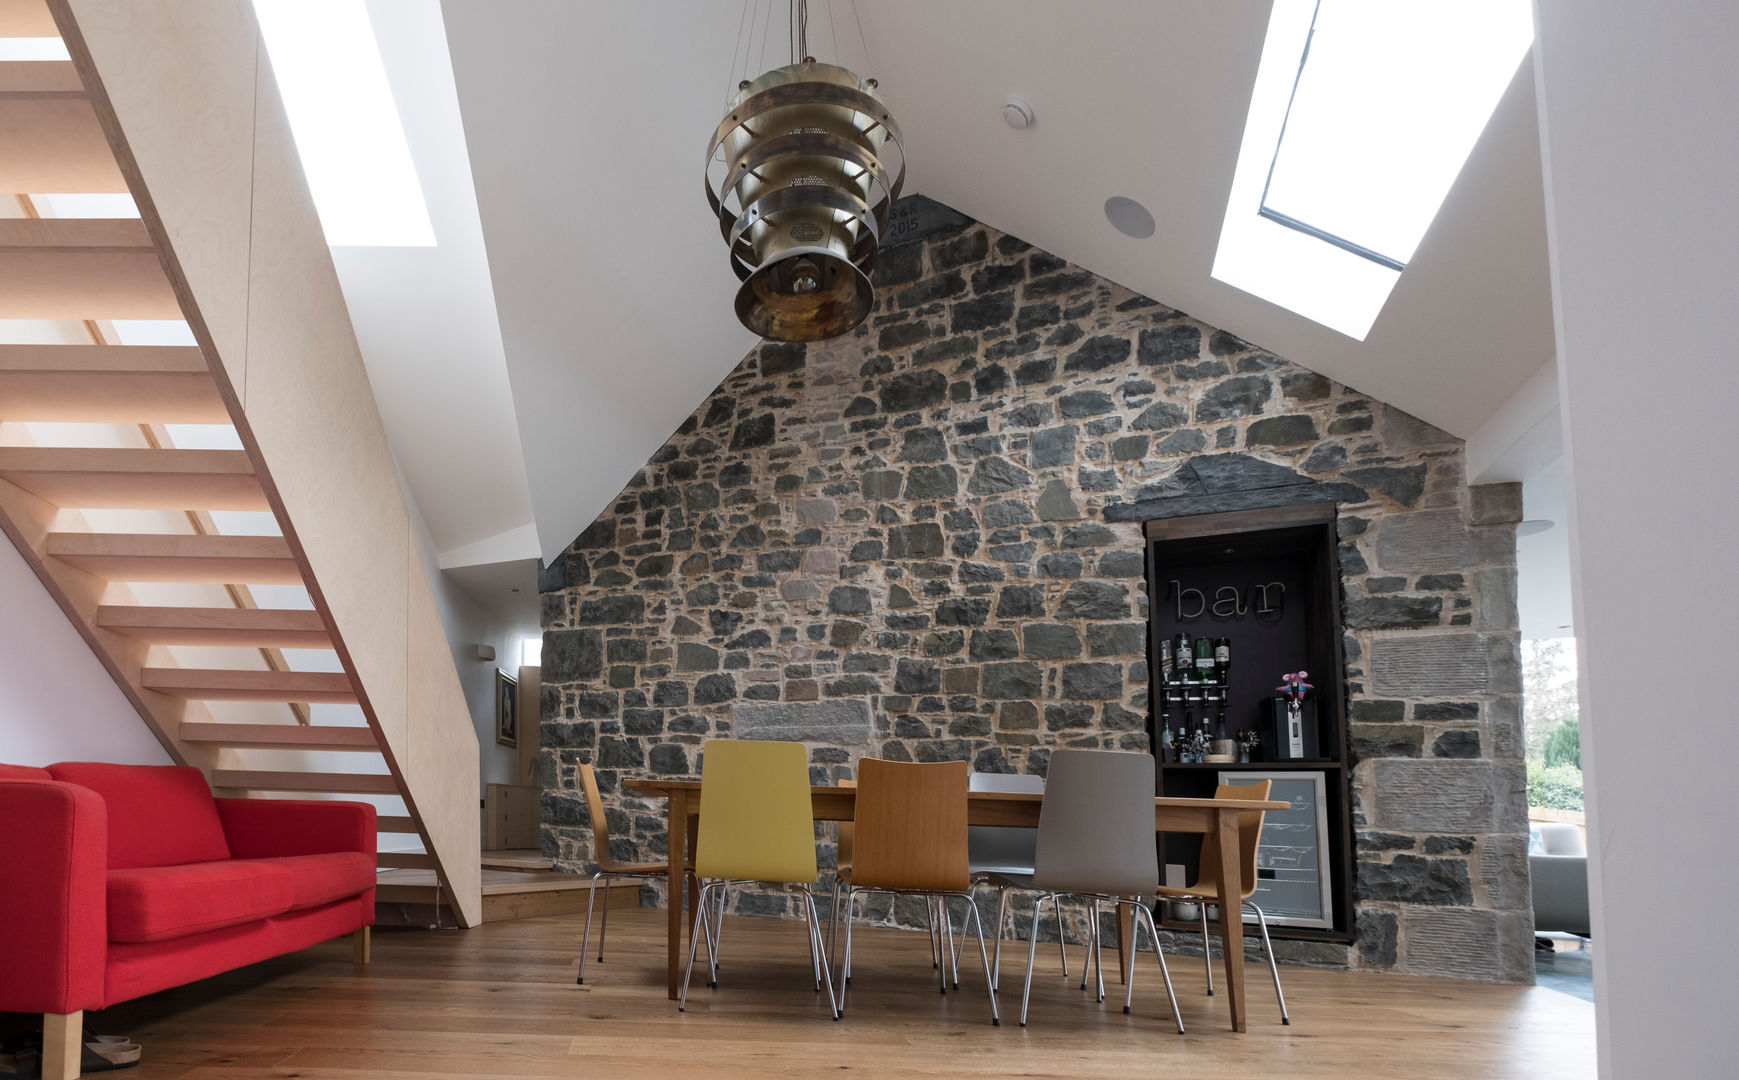 Dining room with exposed stone wall Woodside Parker Kirk Architects Столовая комната в стиле модерн Stone,Dining table,Bespoke,Bespoke Staircase,Plywood,Red sofa,Bar,Beer fridge,Rooflight,Daylight,Pendant light,Reclaimed